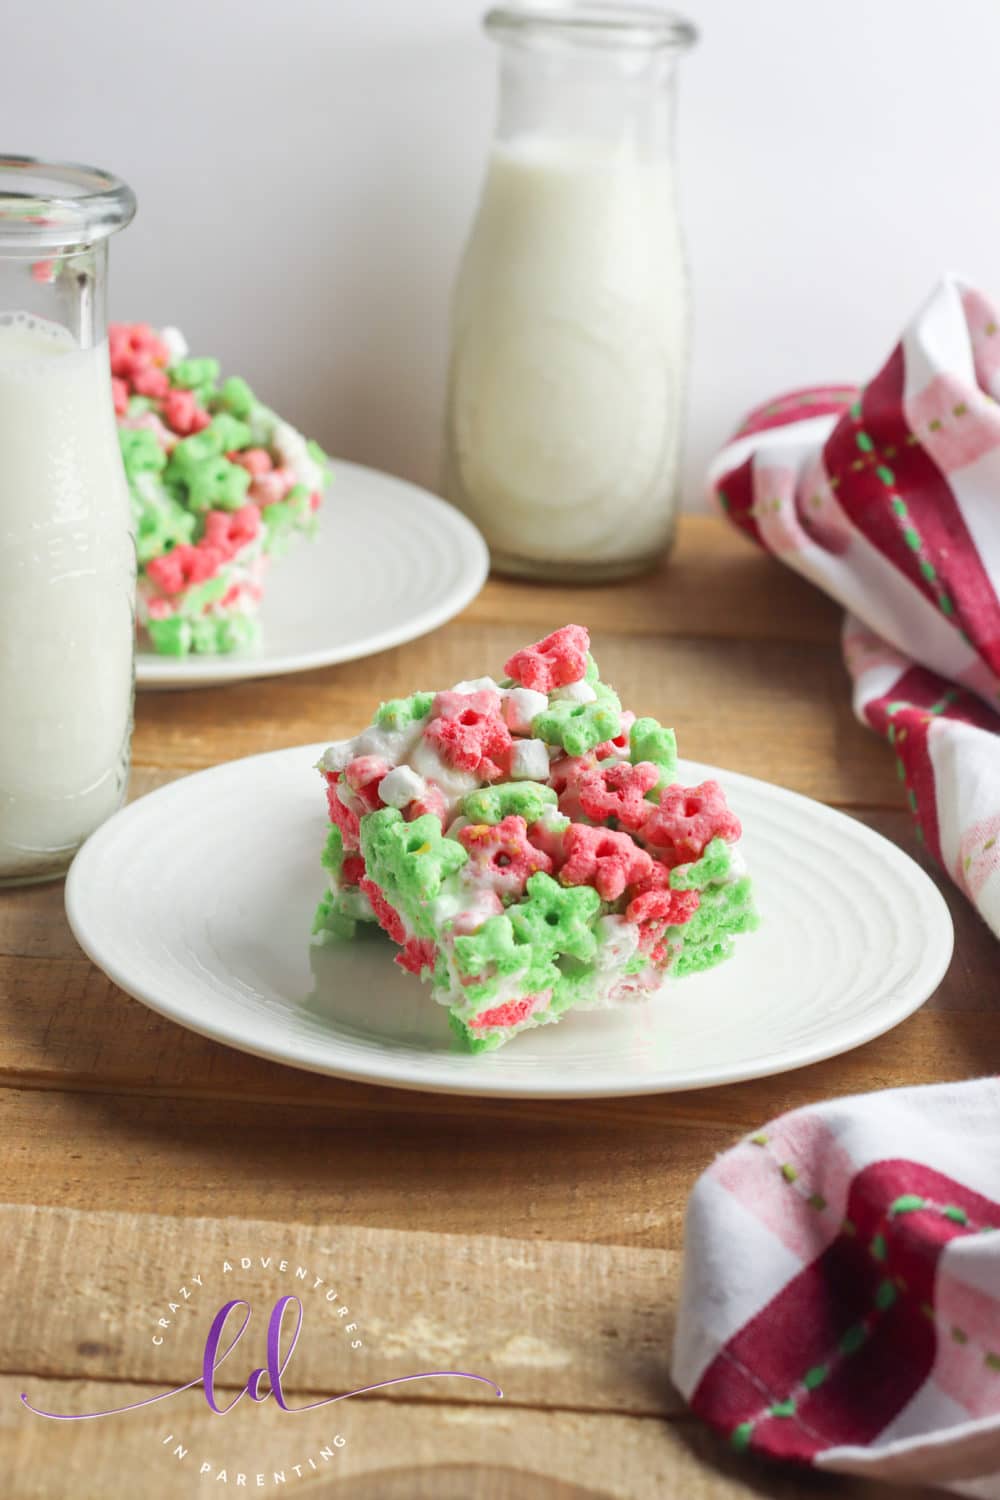 Elf on the Shelf Cereal Treats for the Holidays